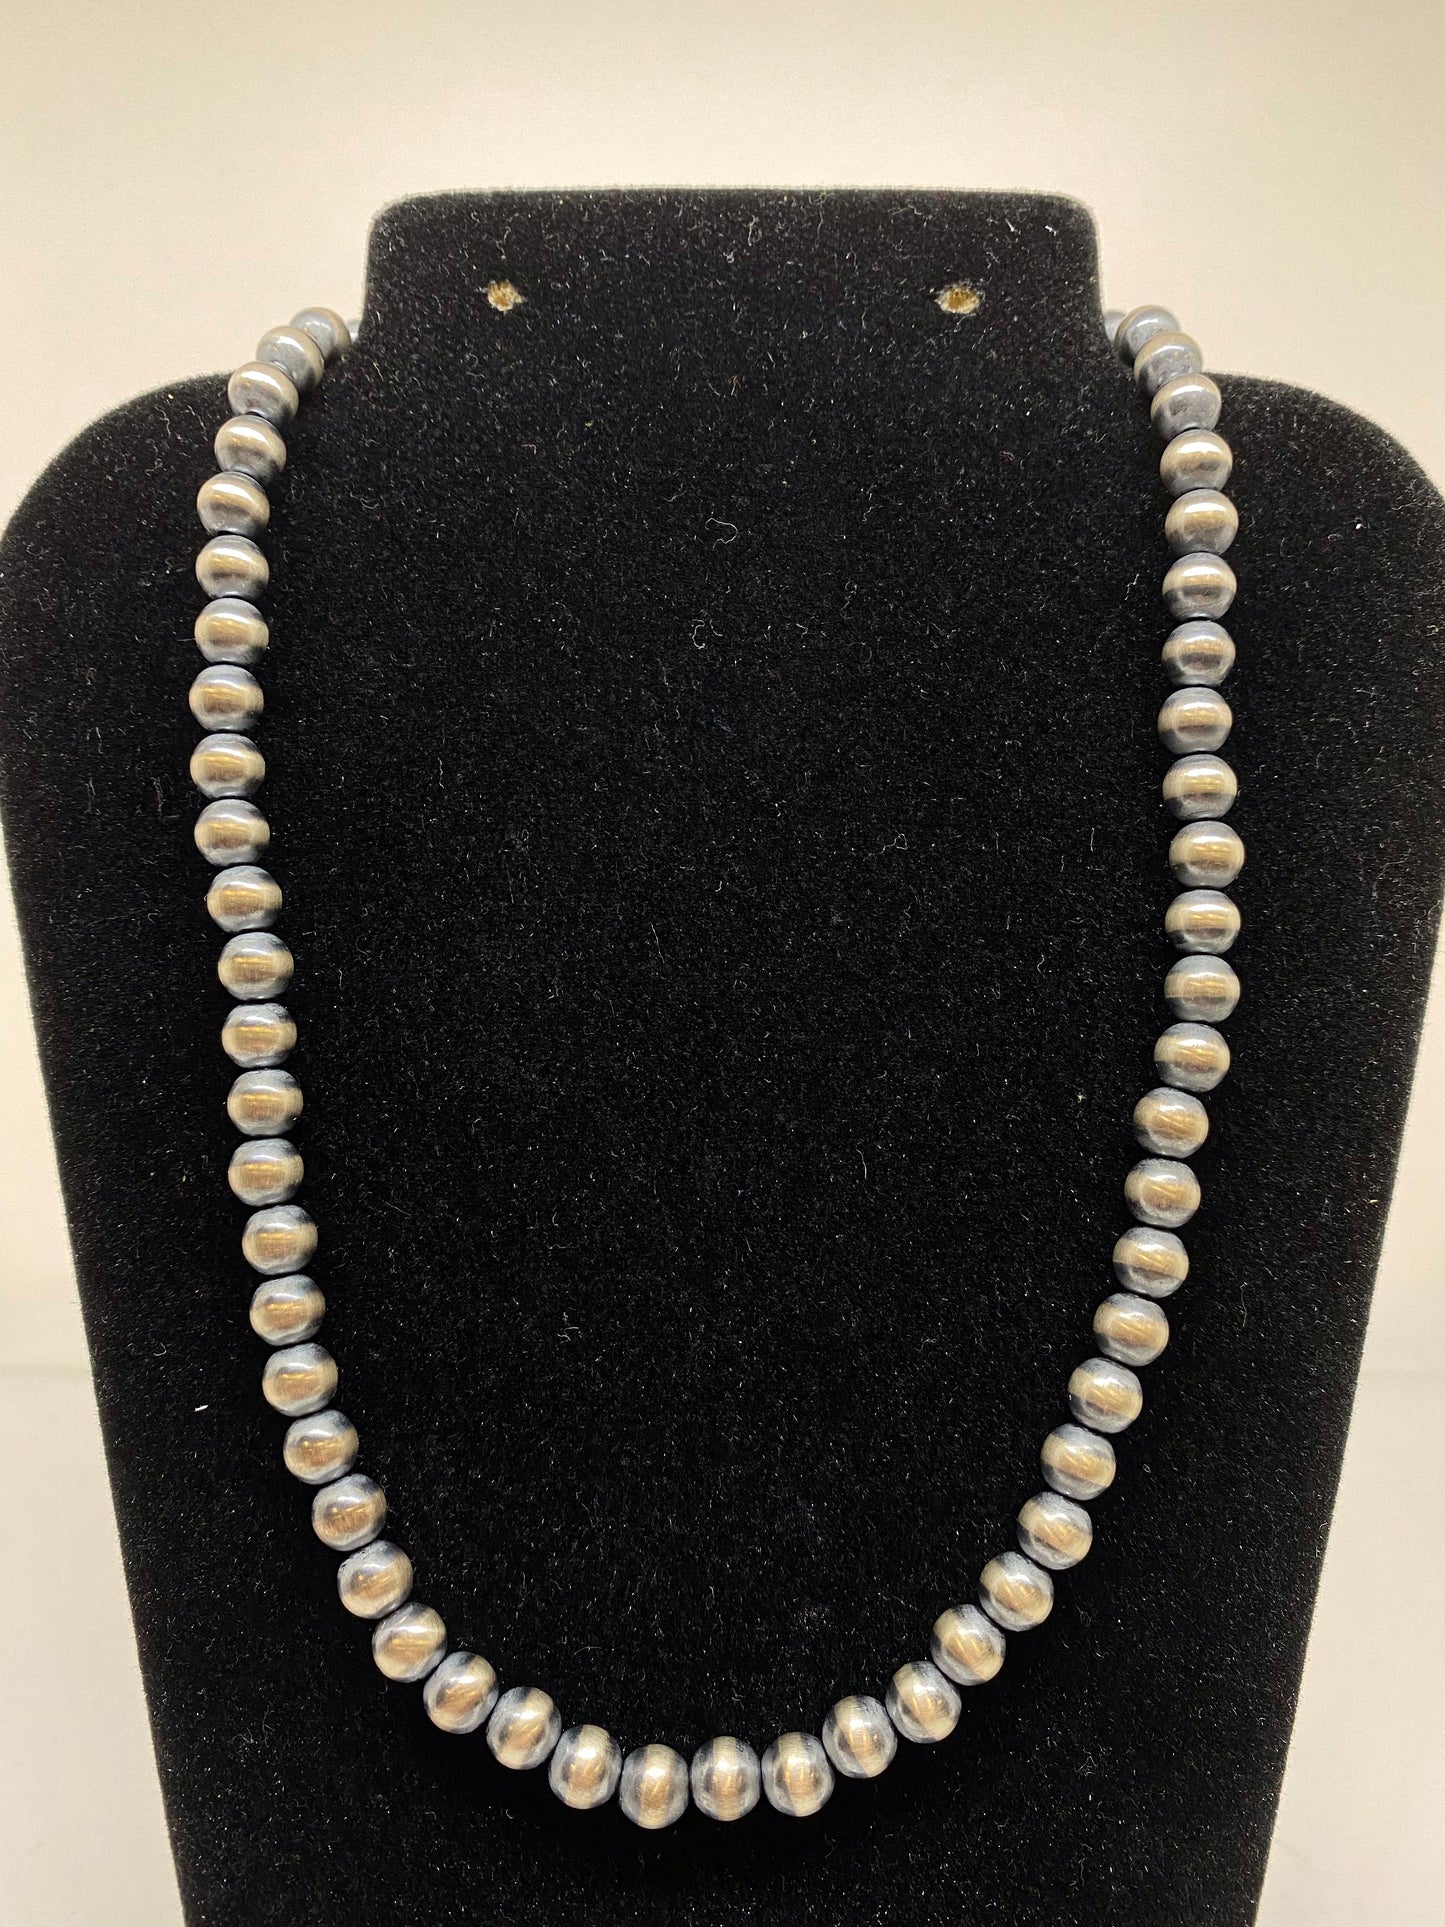 The Tonia Pearls